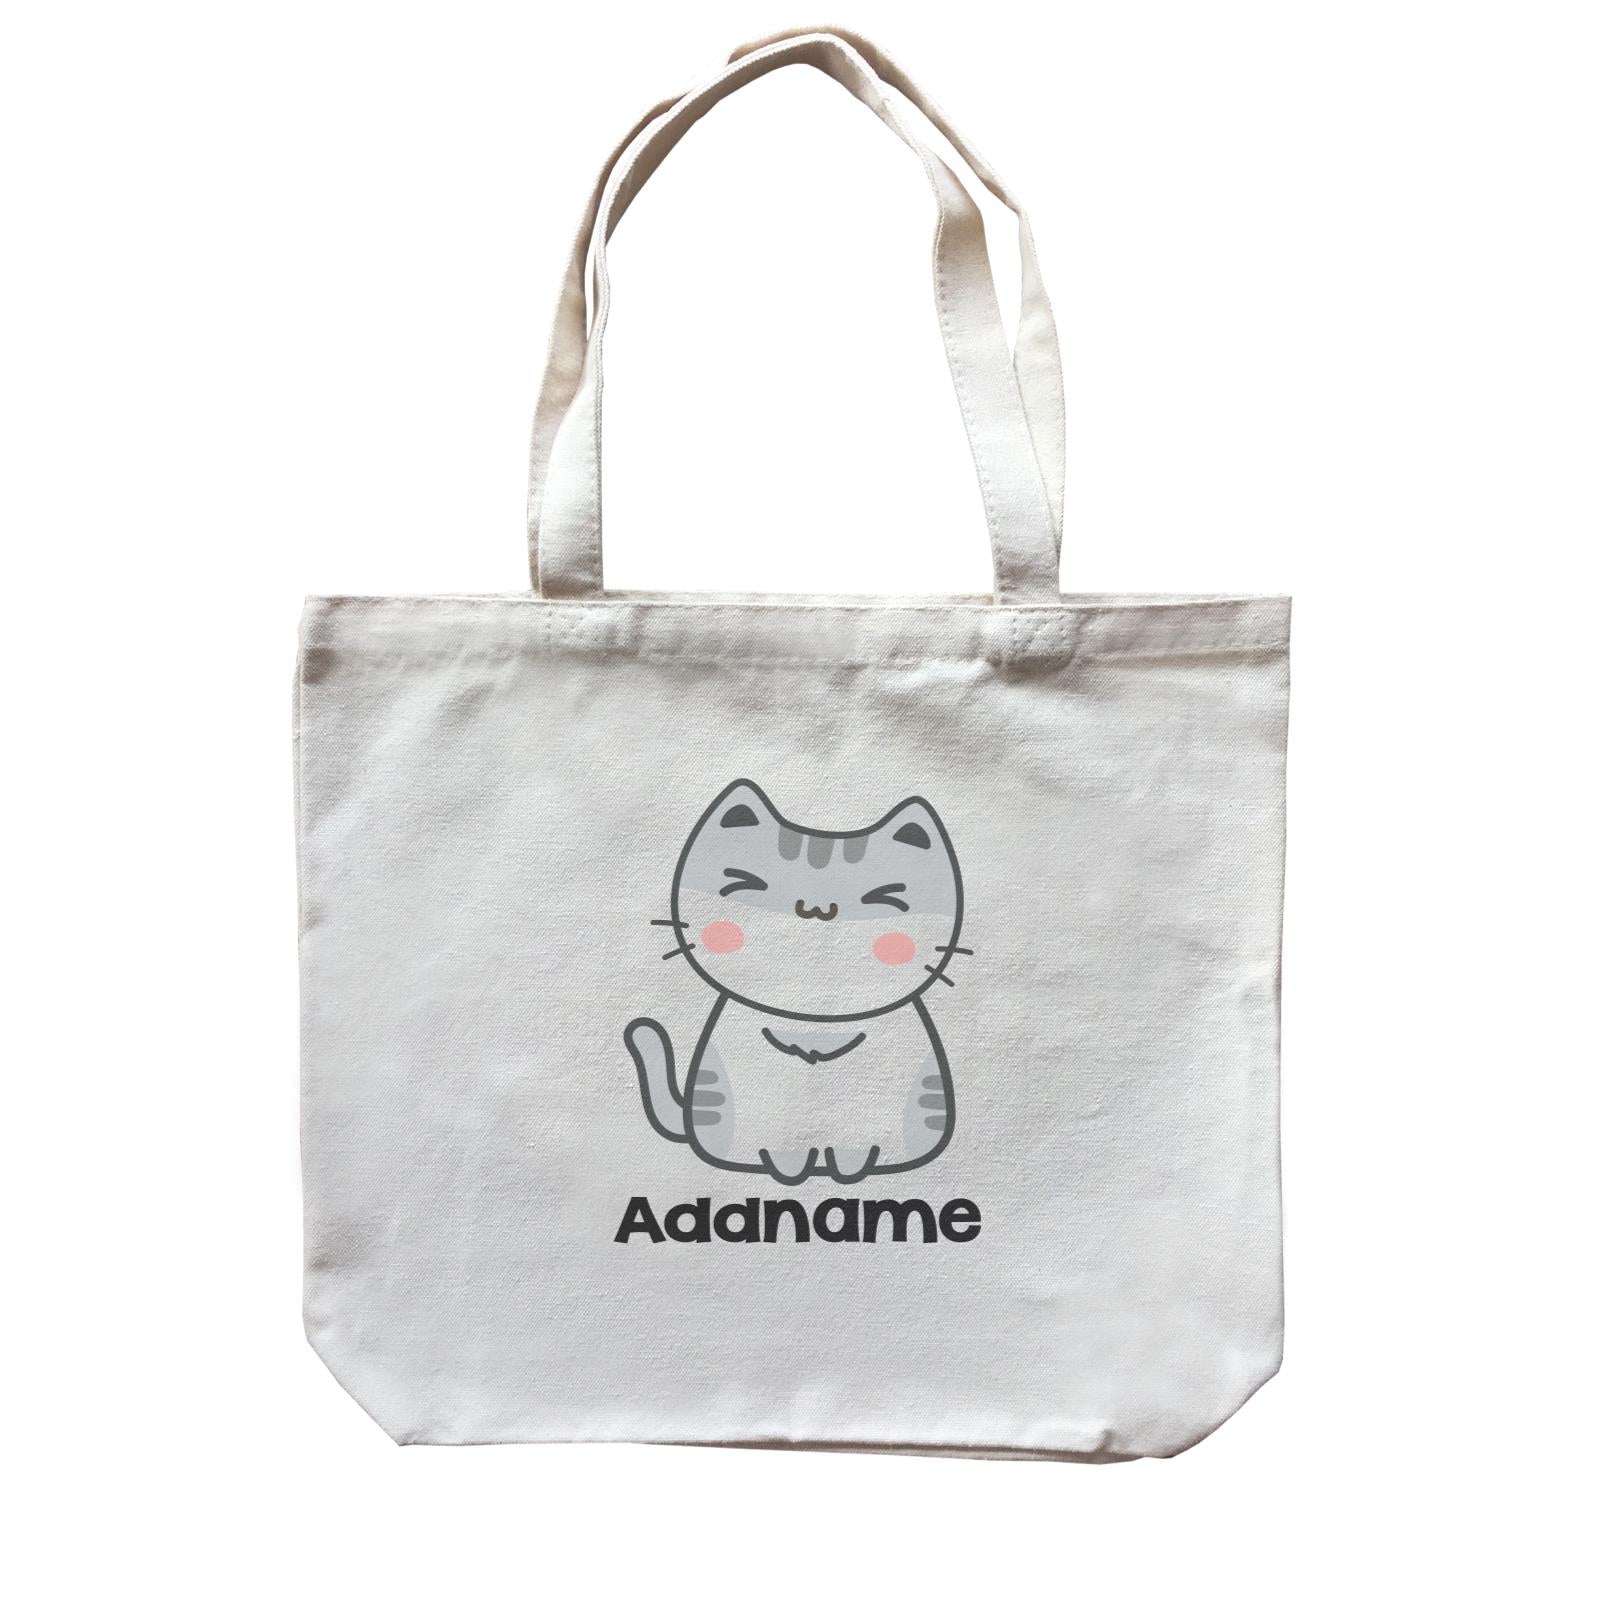 Drawn Adorable Cats White & Grey Addname Canvas Bag